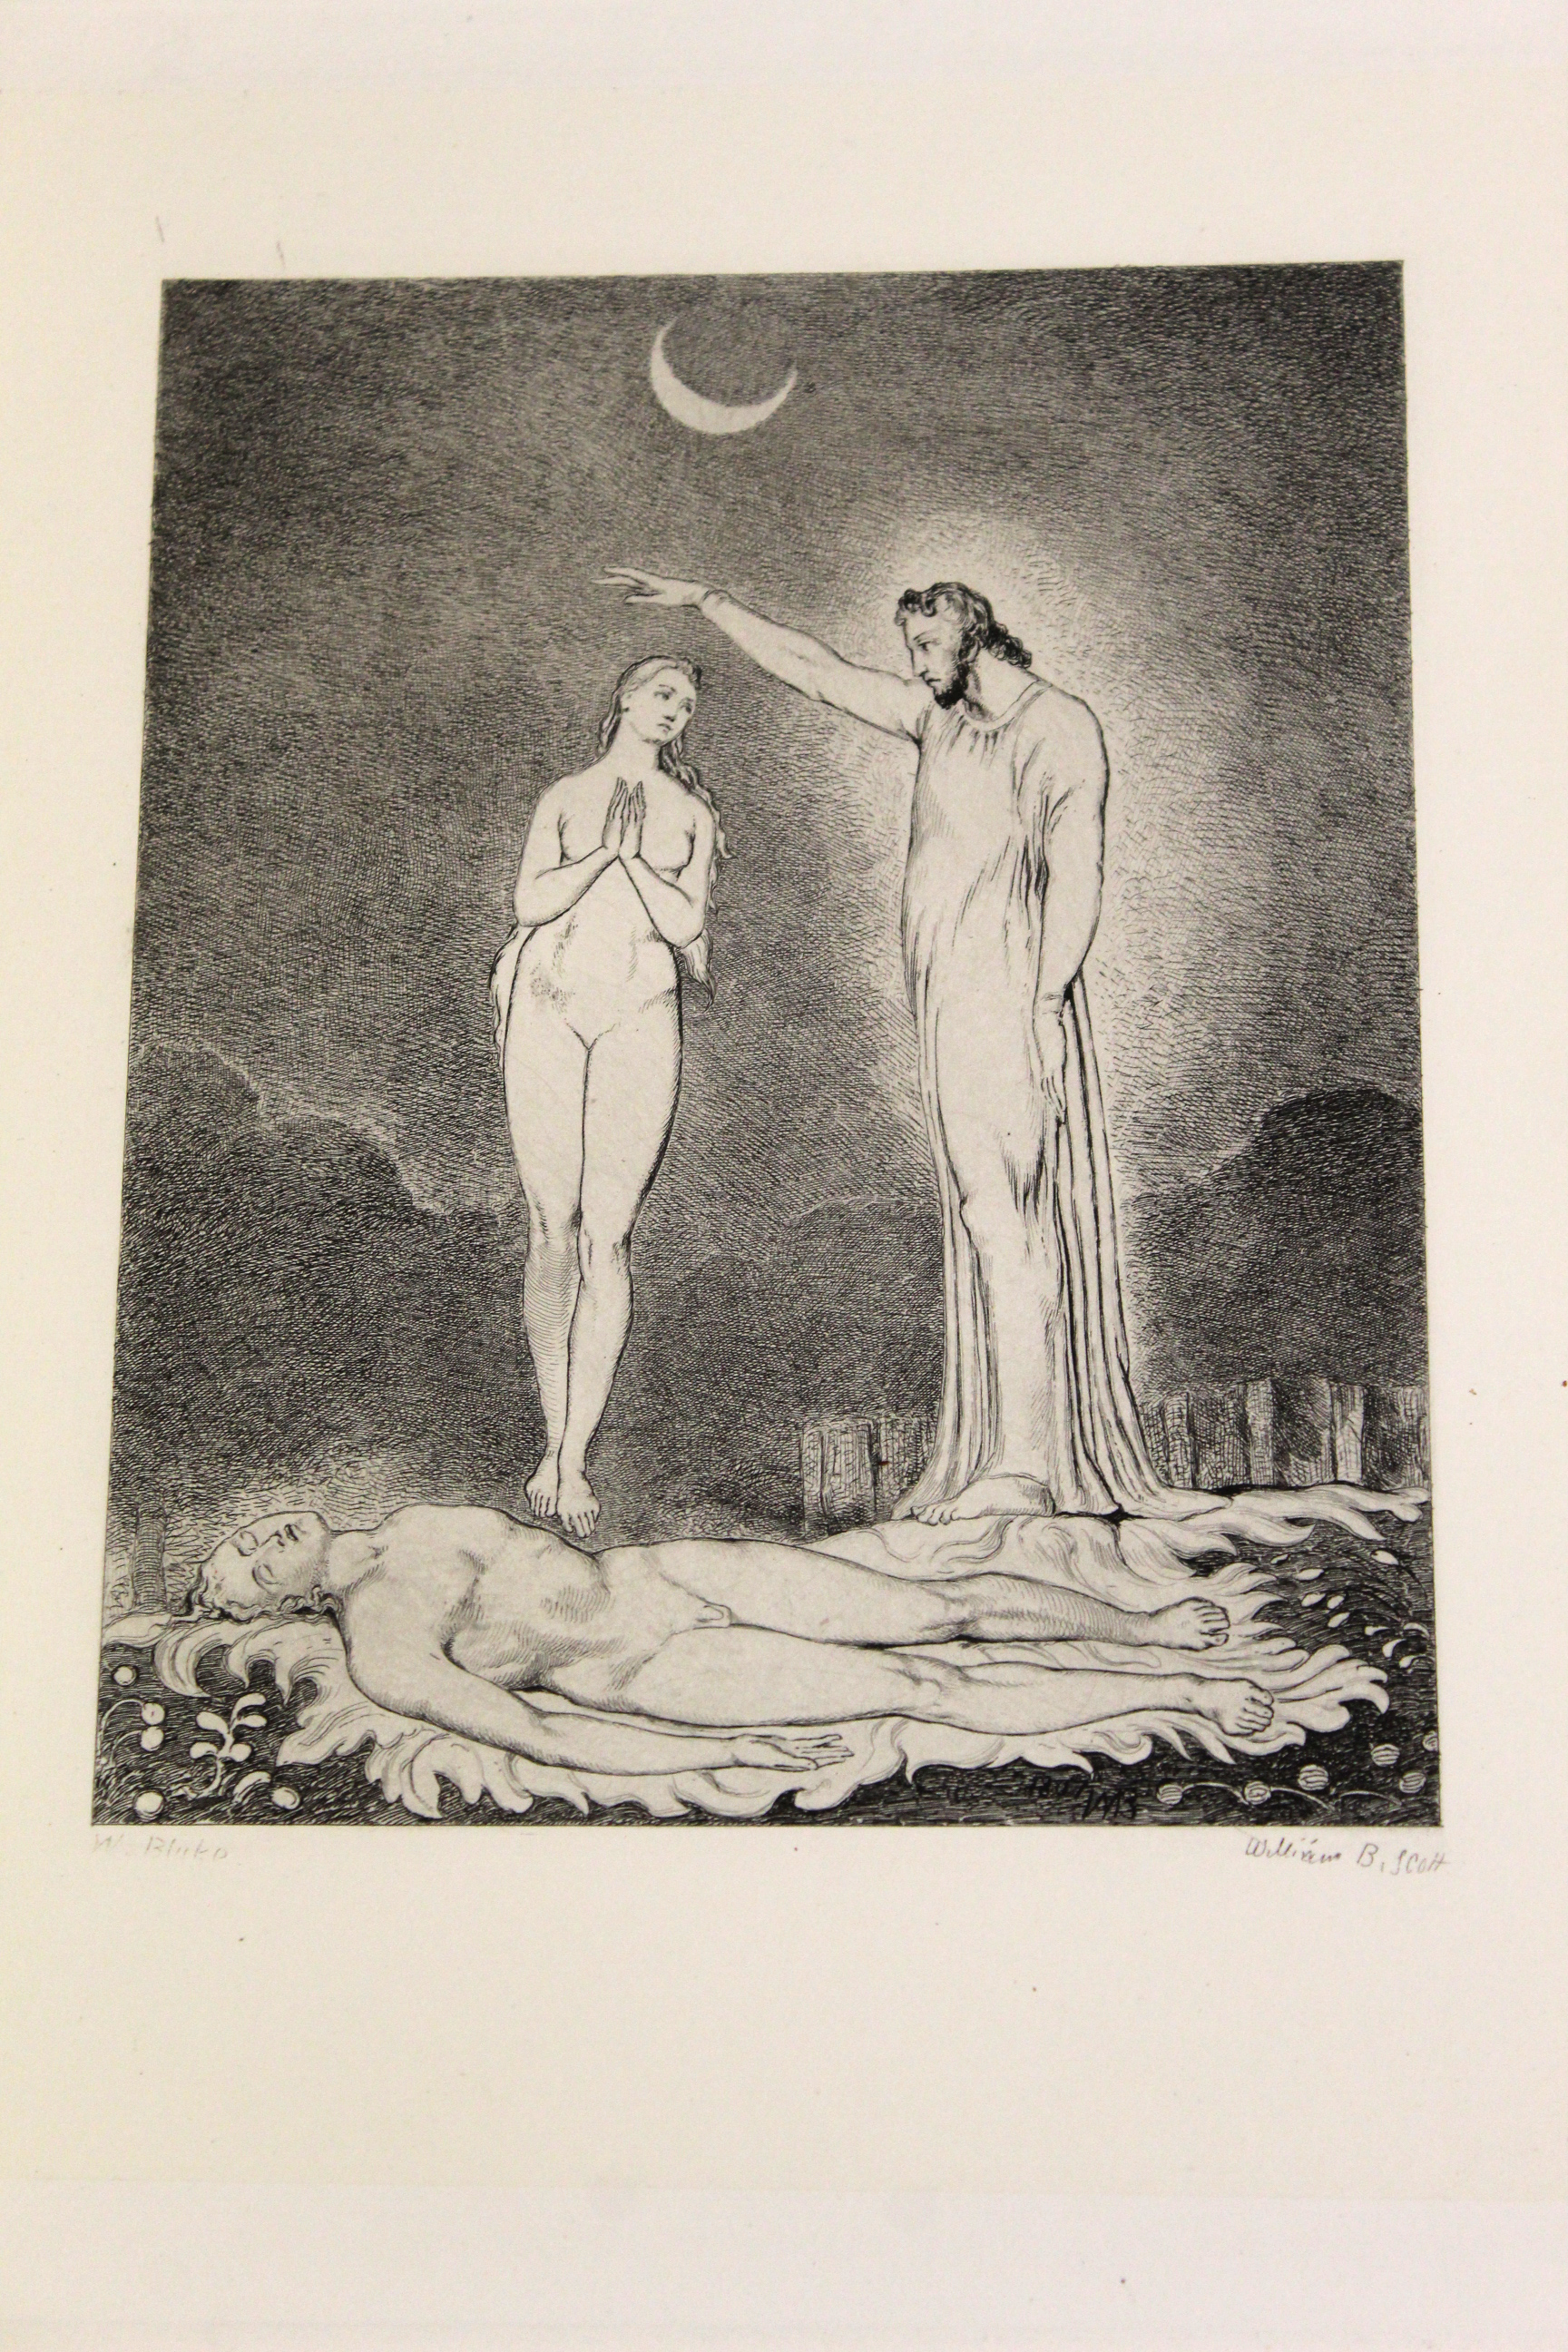 WILLIAM BELL SCOTT: WILLIAM BLAKE, ETCHINGS FROM HIS WORKS, London, Chatto & Windus, 1878, 1st - Image 2 of 4